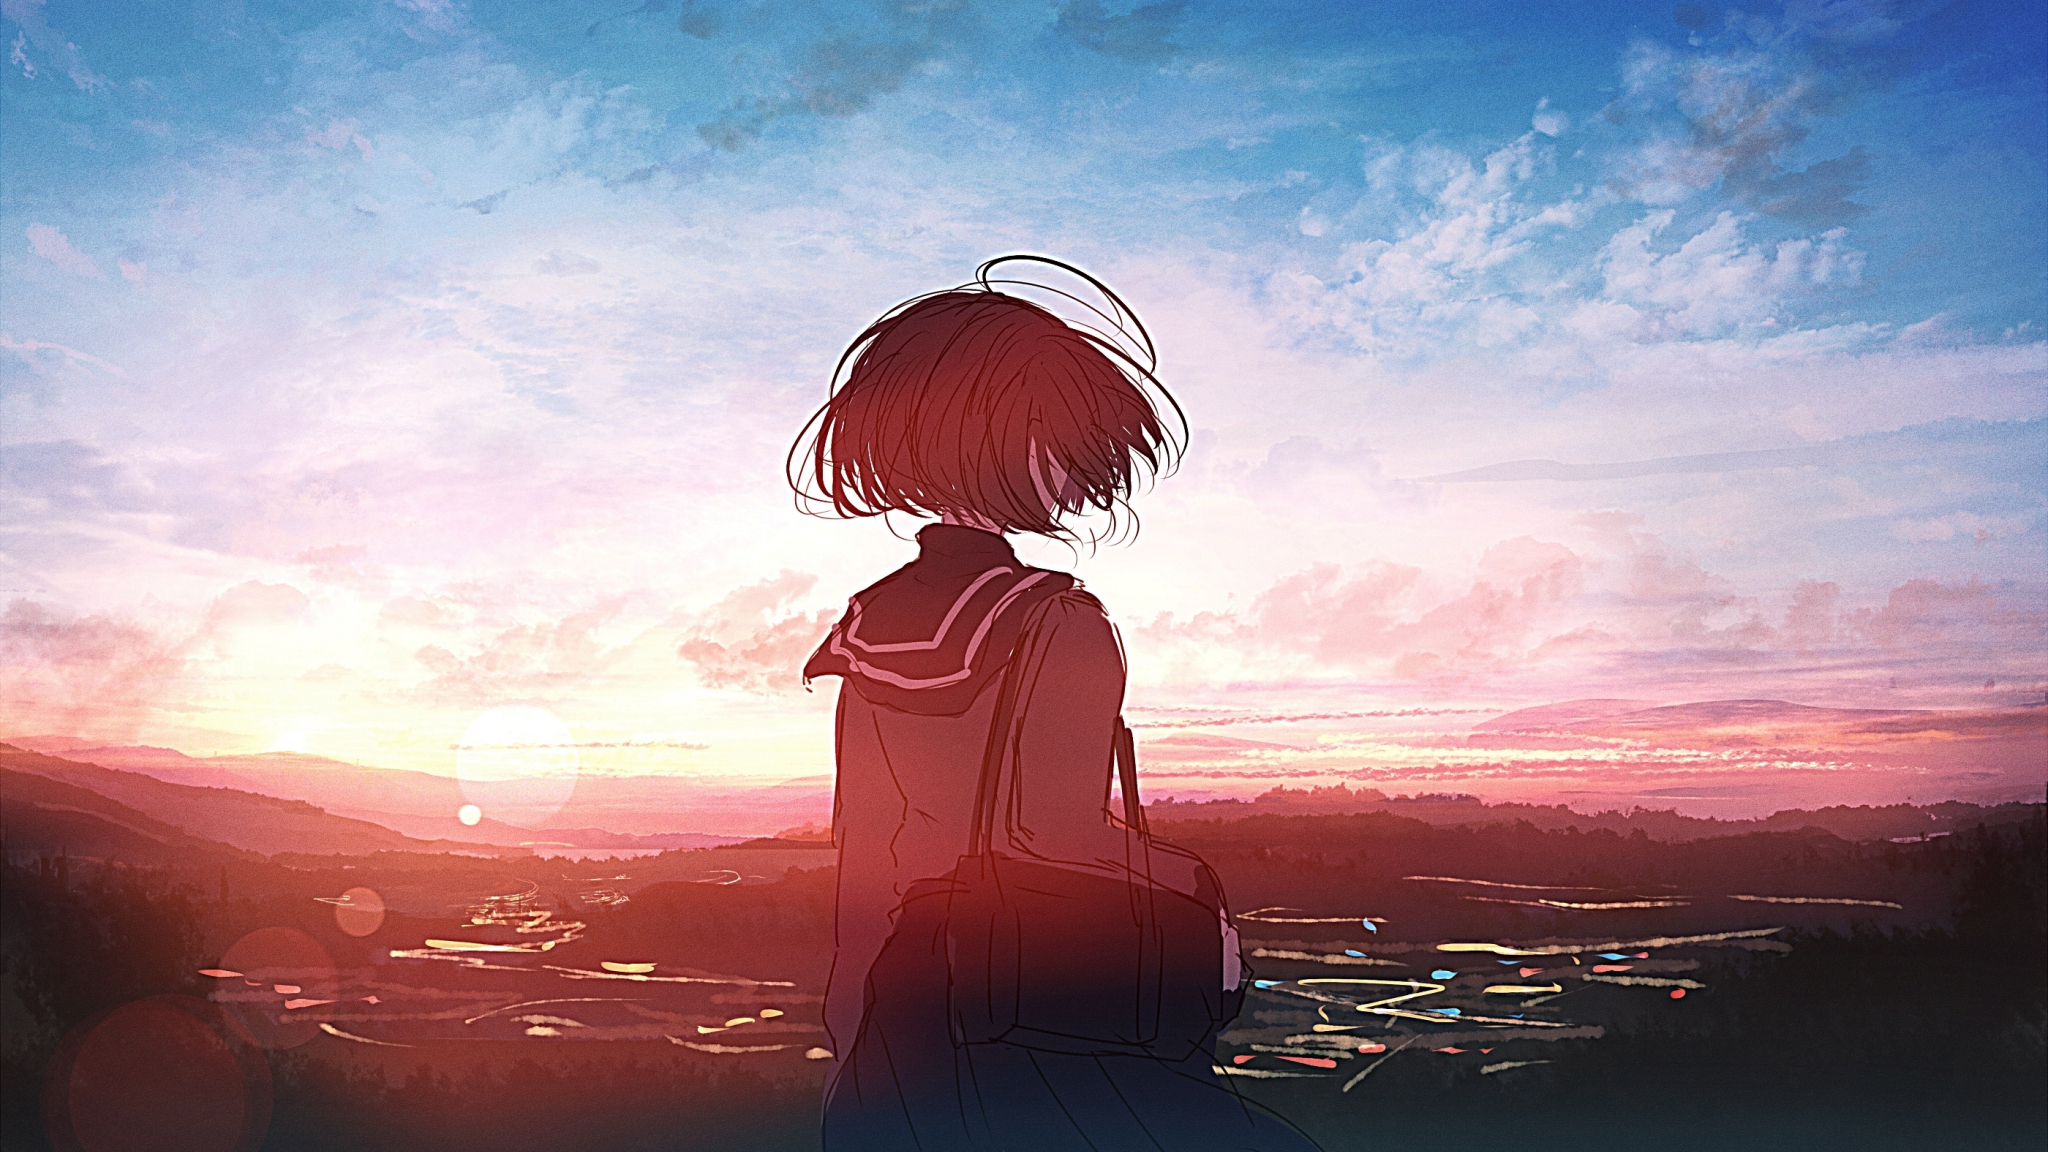 Download 2048x1152 wallpaper anime girl, sunset, outdoor, art, dual wide, widescreen, 2048x1152 HD image, background, 22937